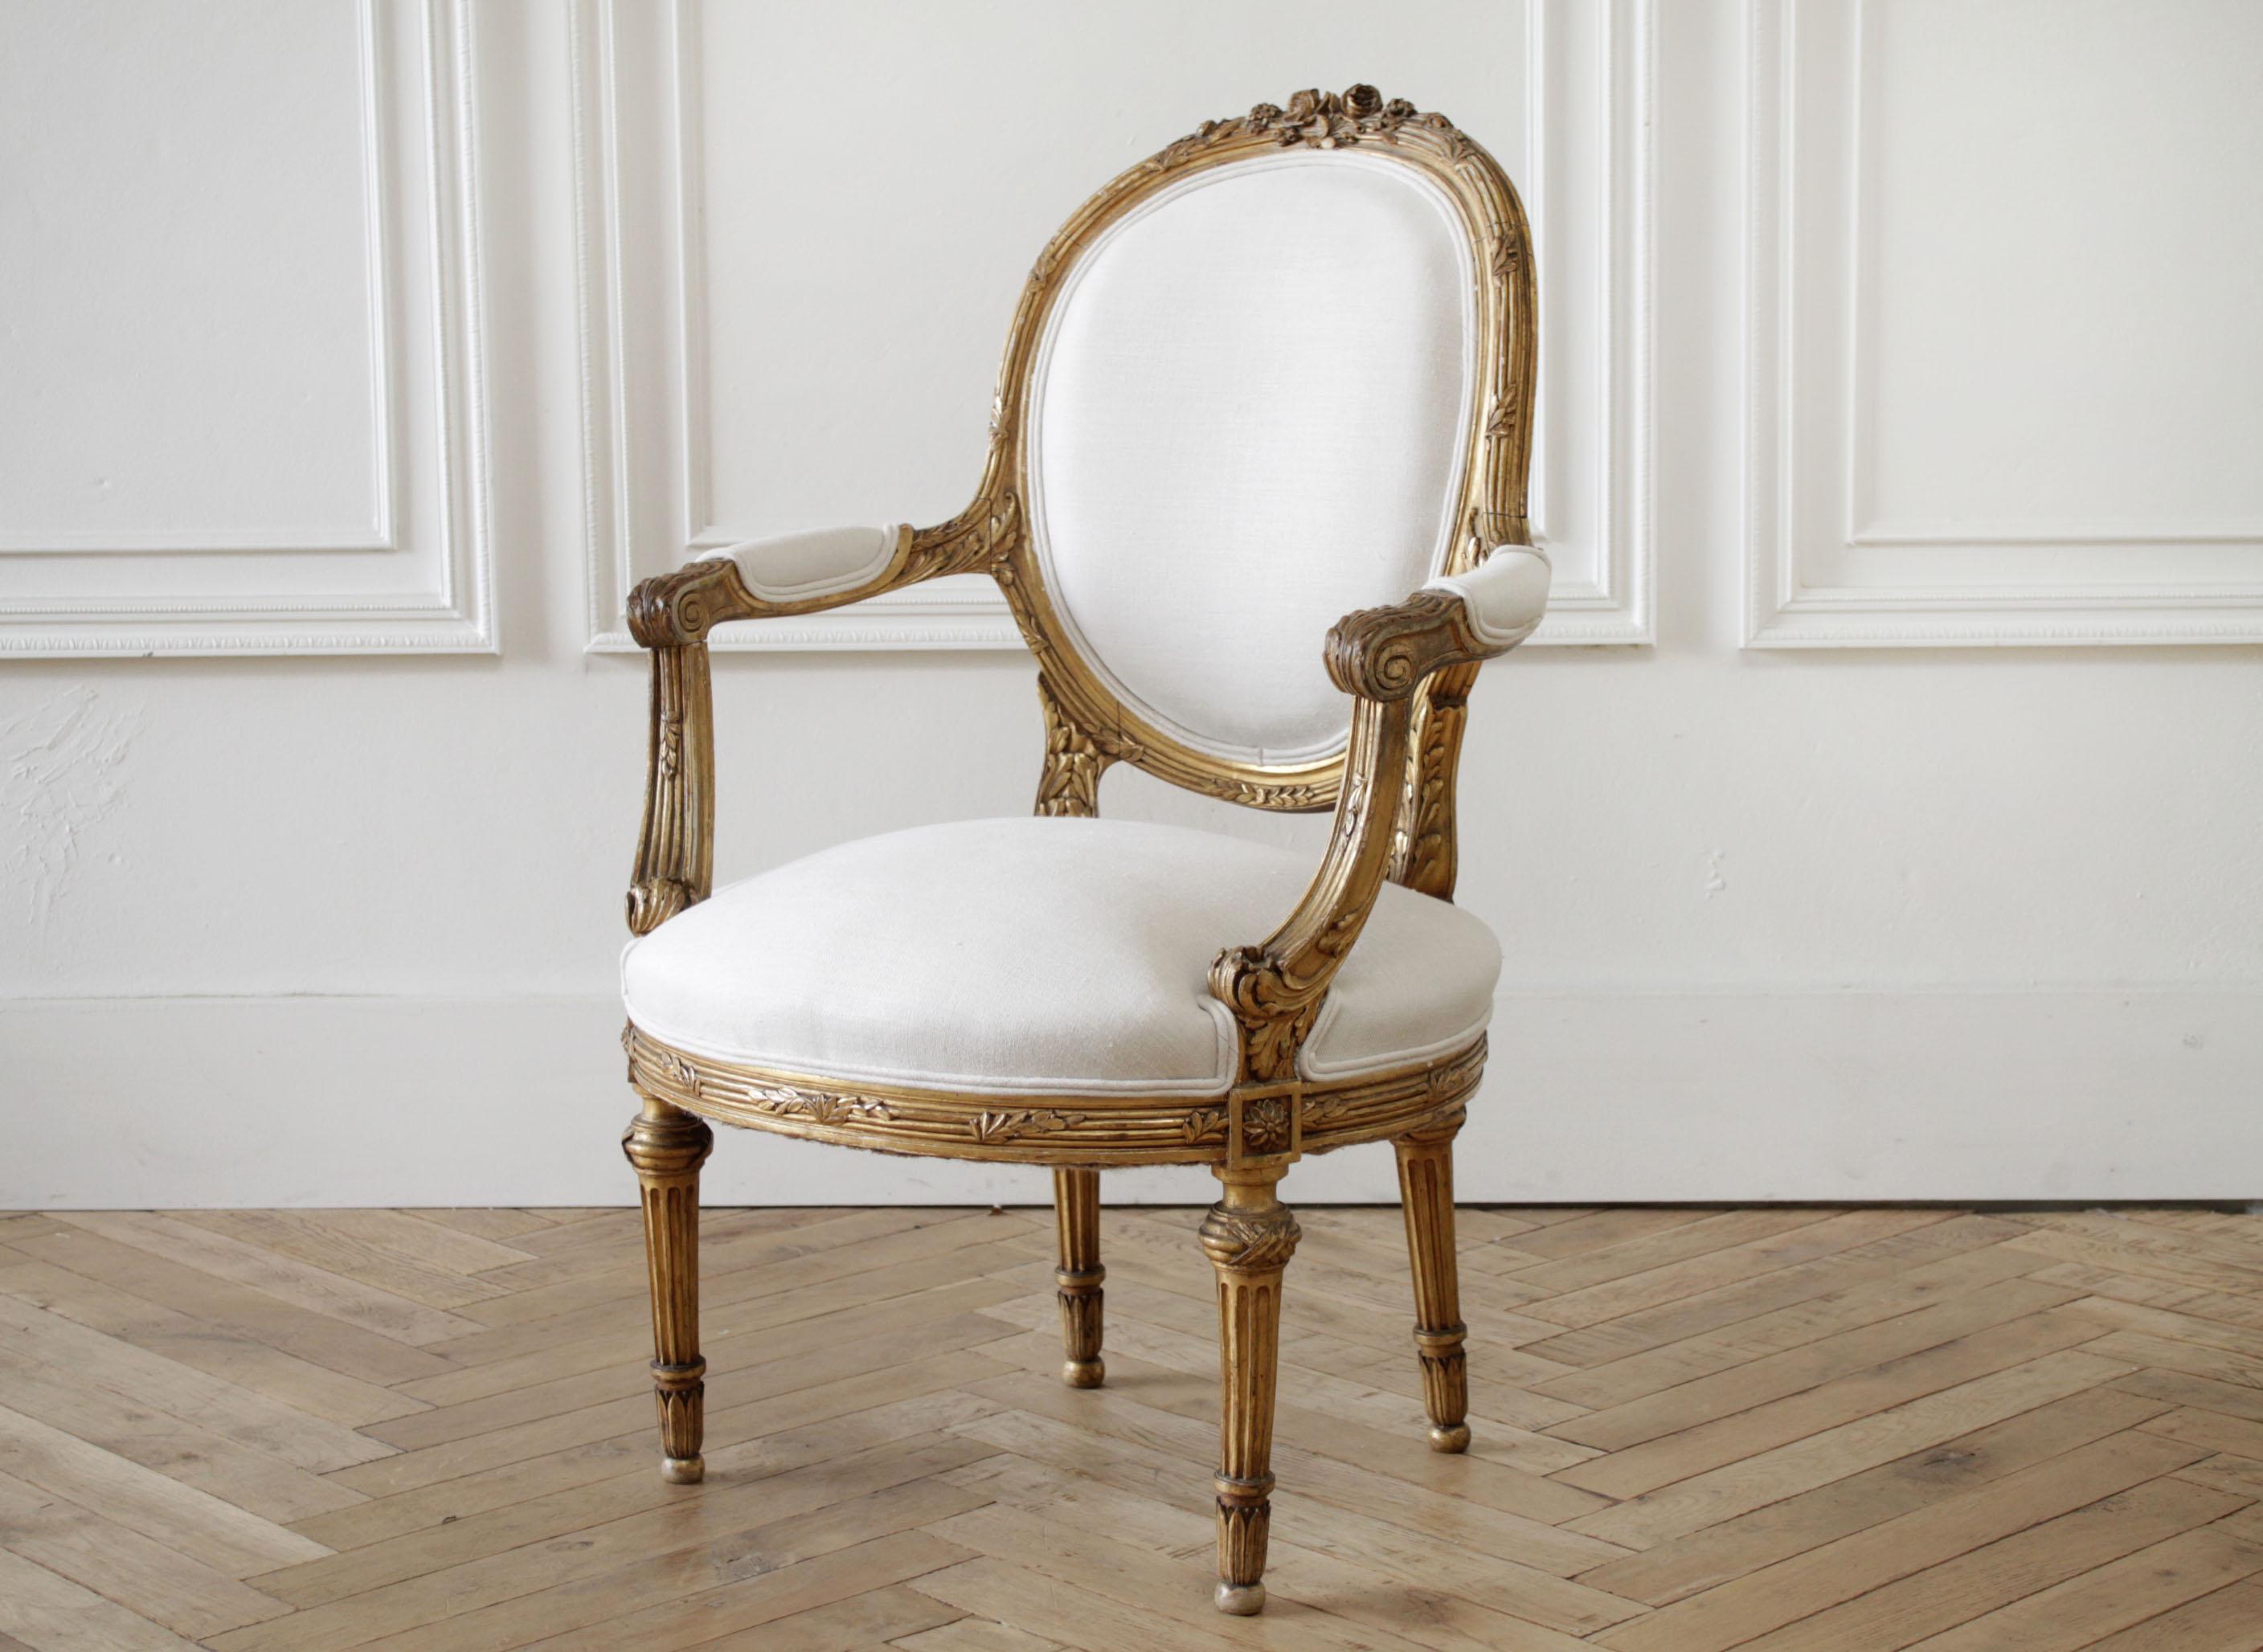 19th century carved giltwood French Louis XVI style open armchairs beautiful original gilt patina with subtle distressed edges. We have reupholstered these in a softened light natural colored linen. Very solid and sturdy, ready for everyday